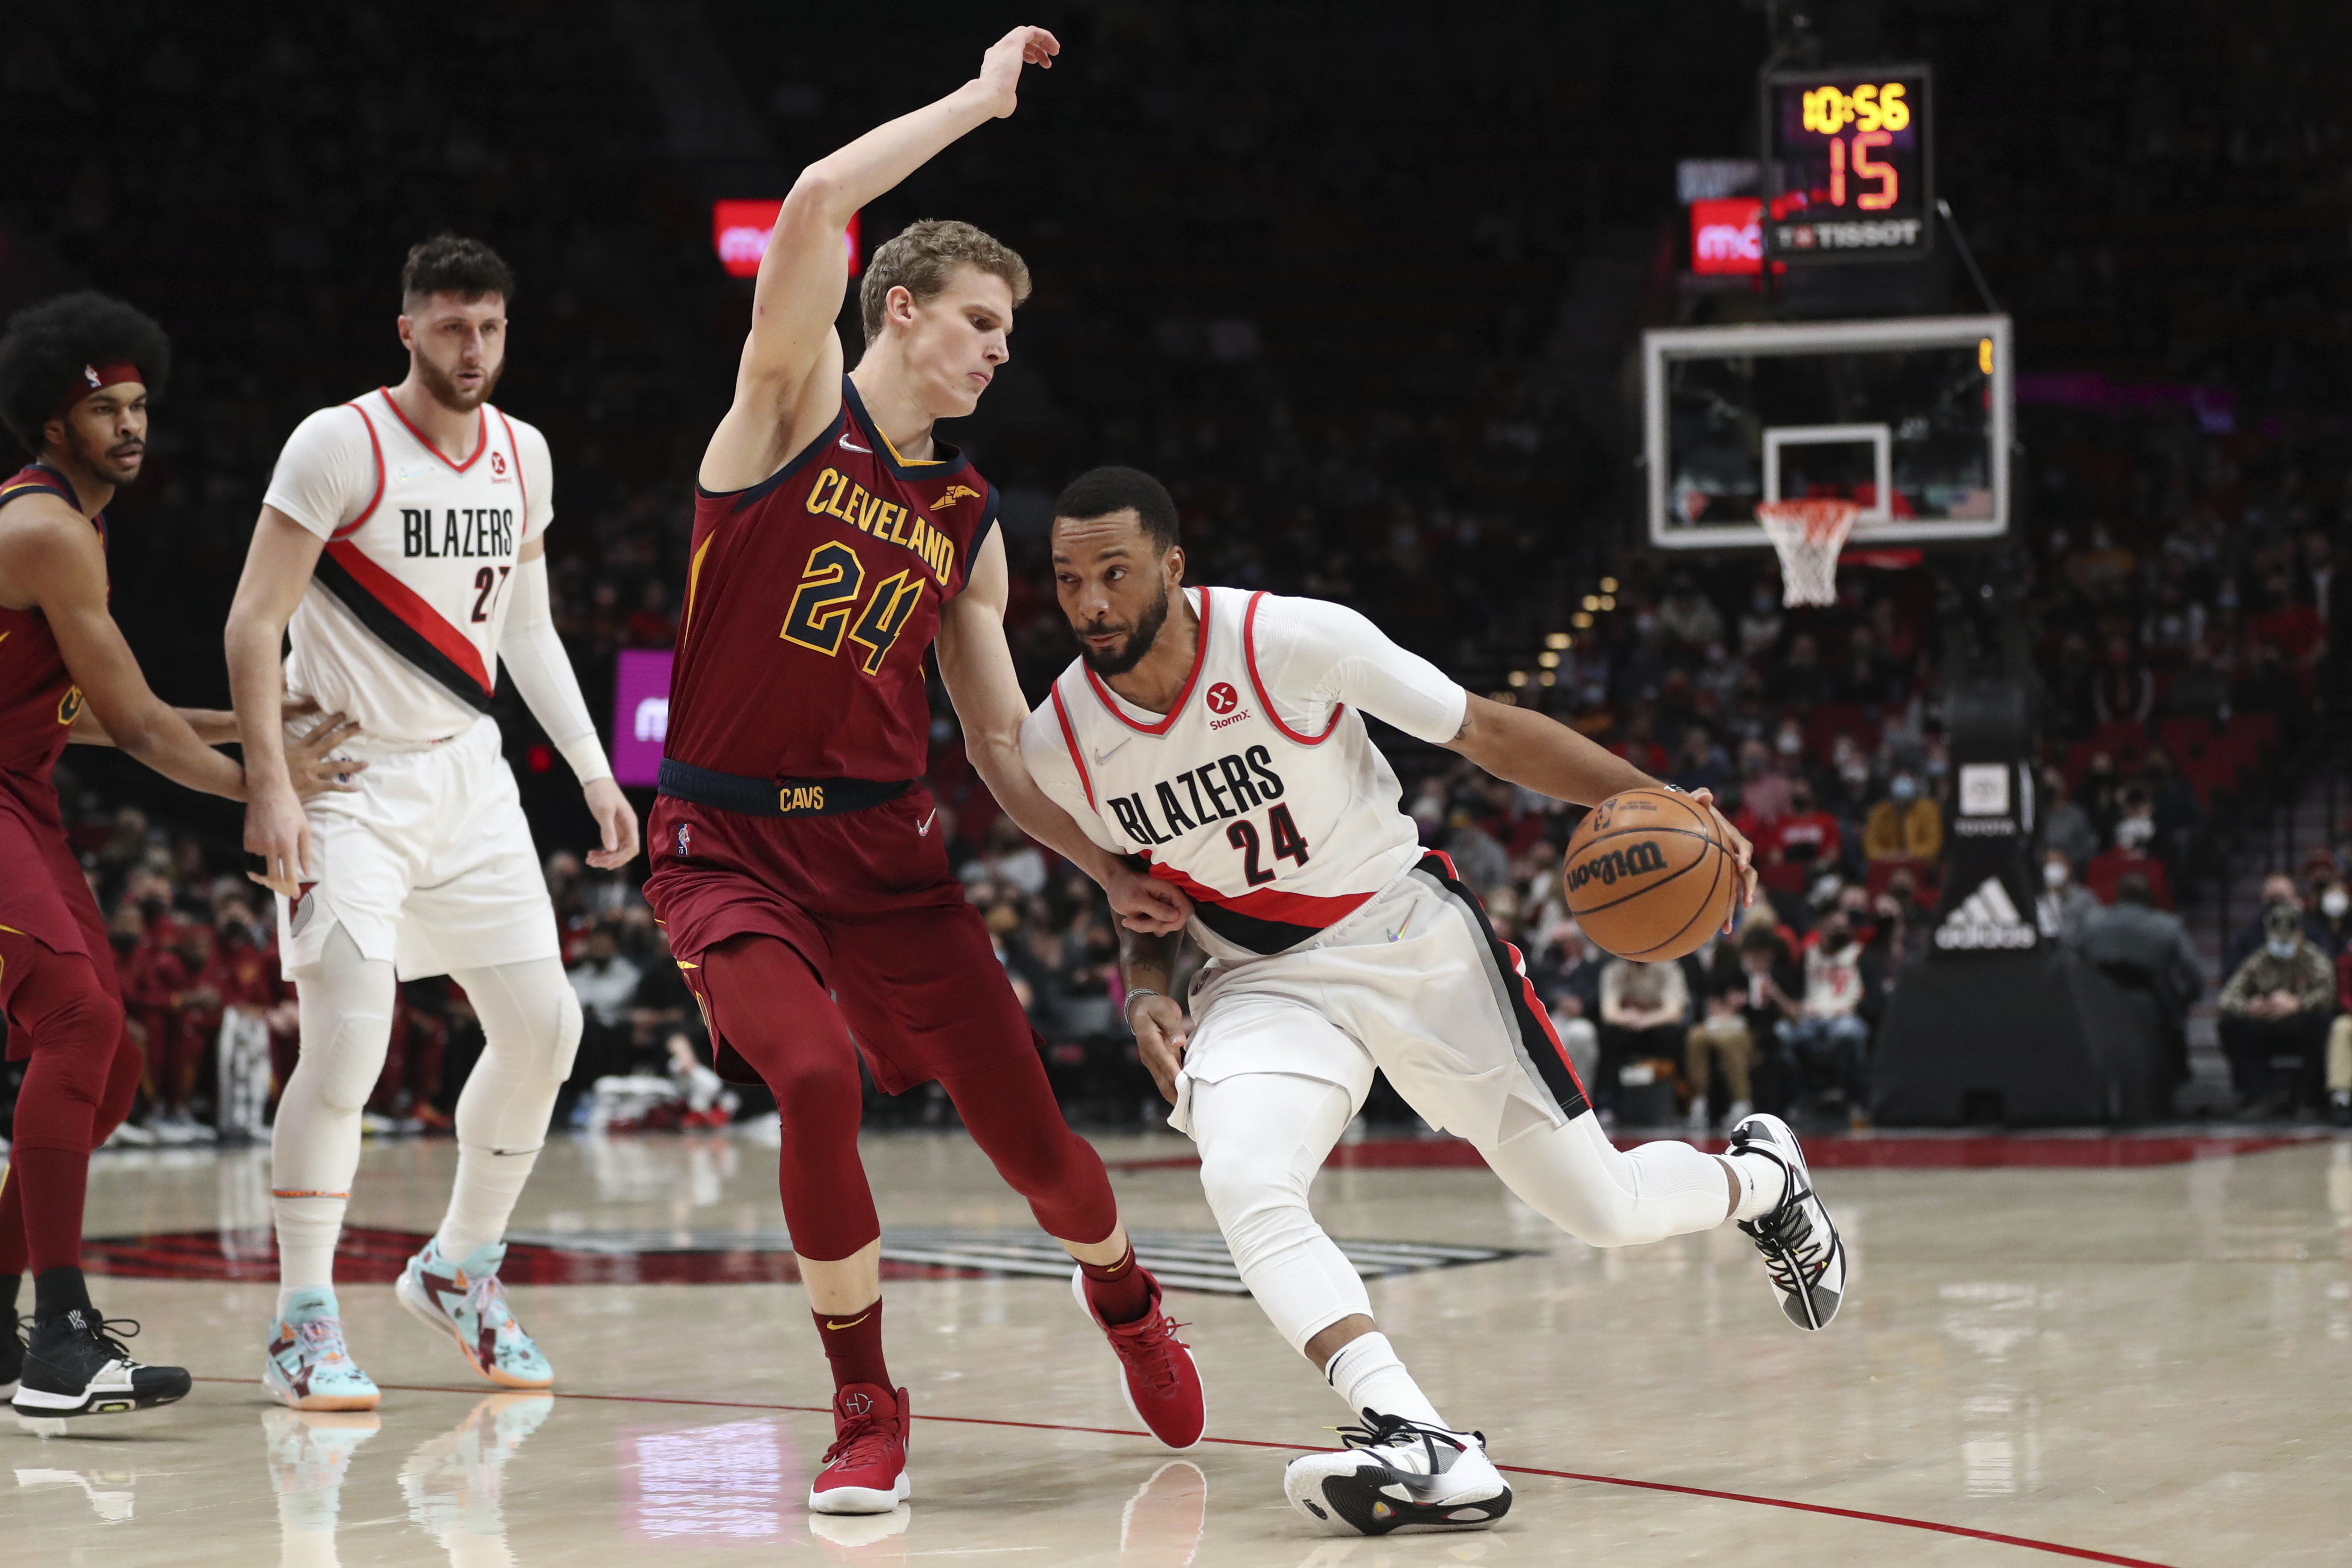 Garland's 26 points leads Cavs in 114-101 win at Portland - The